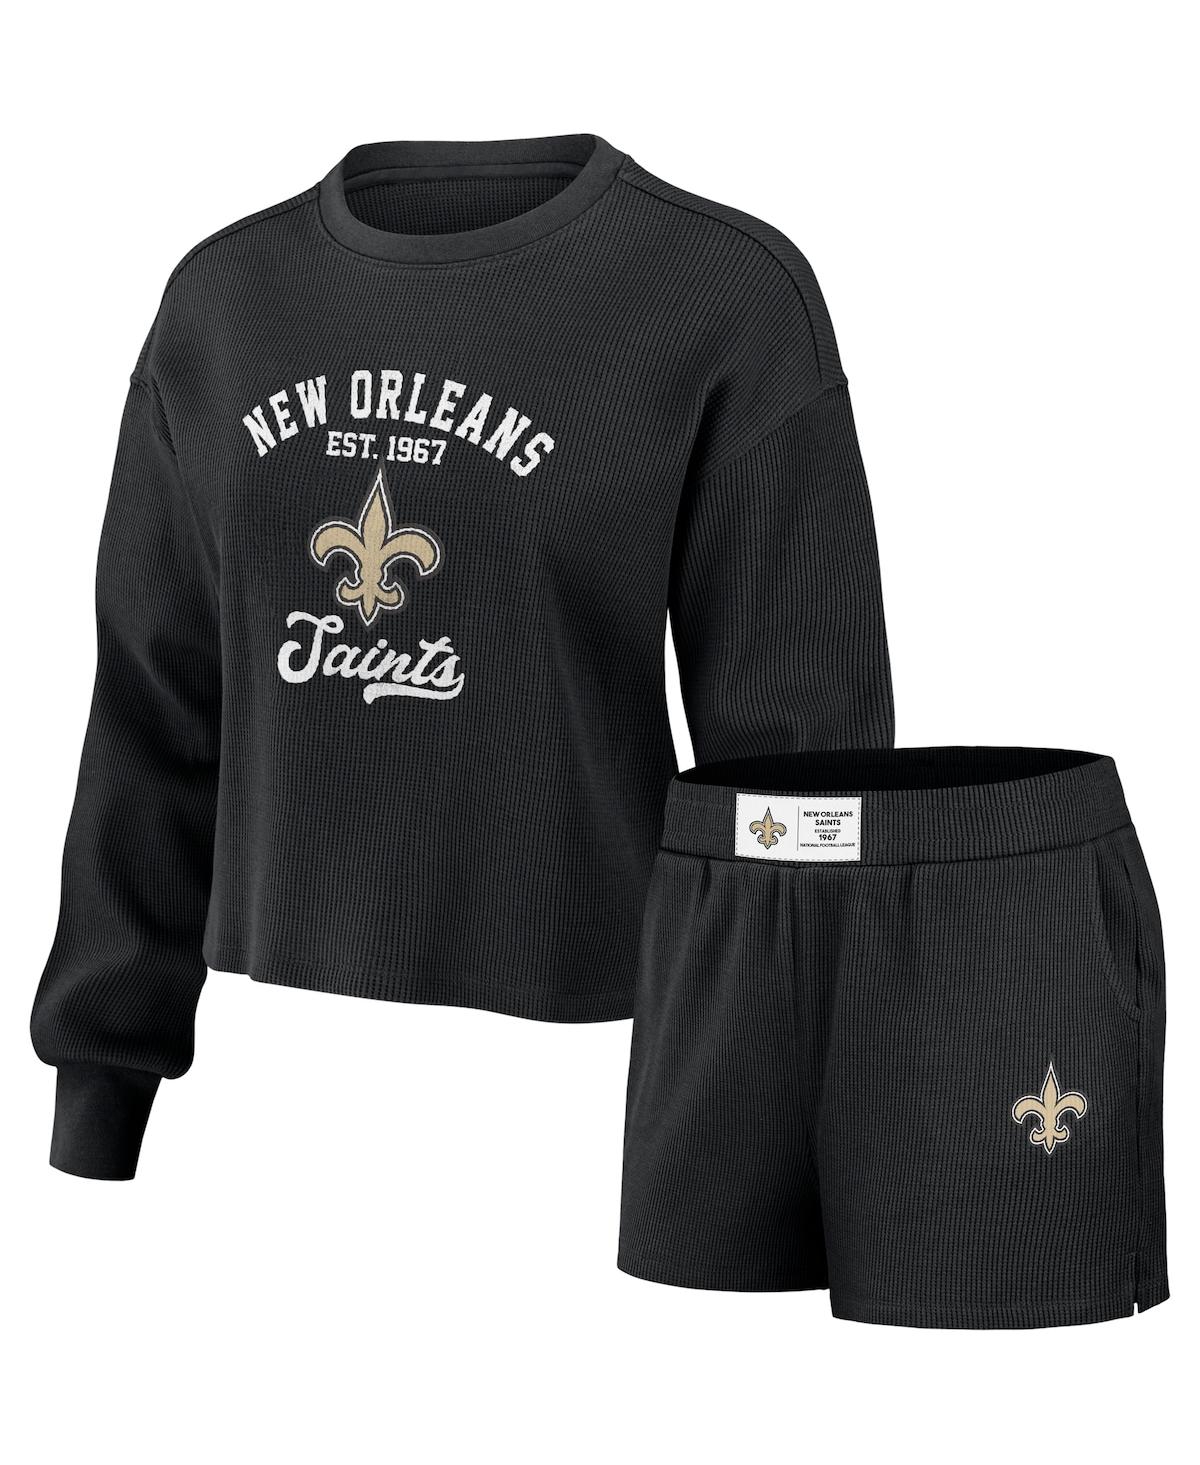 Wear By Erin Andrews Women's  Black Distressed New Orleans Saints Waffle Knit Long Sleeve T-shirt And